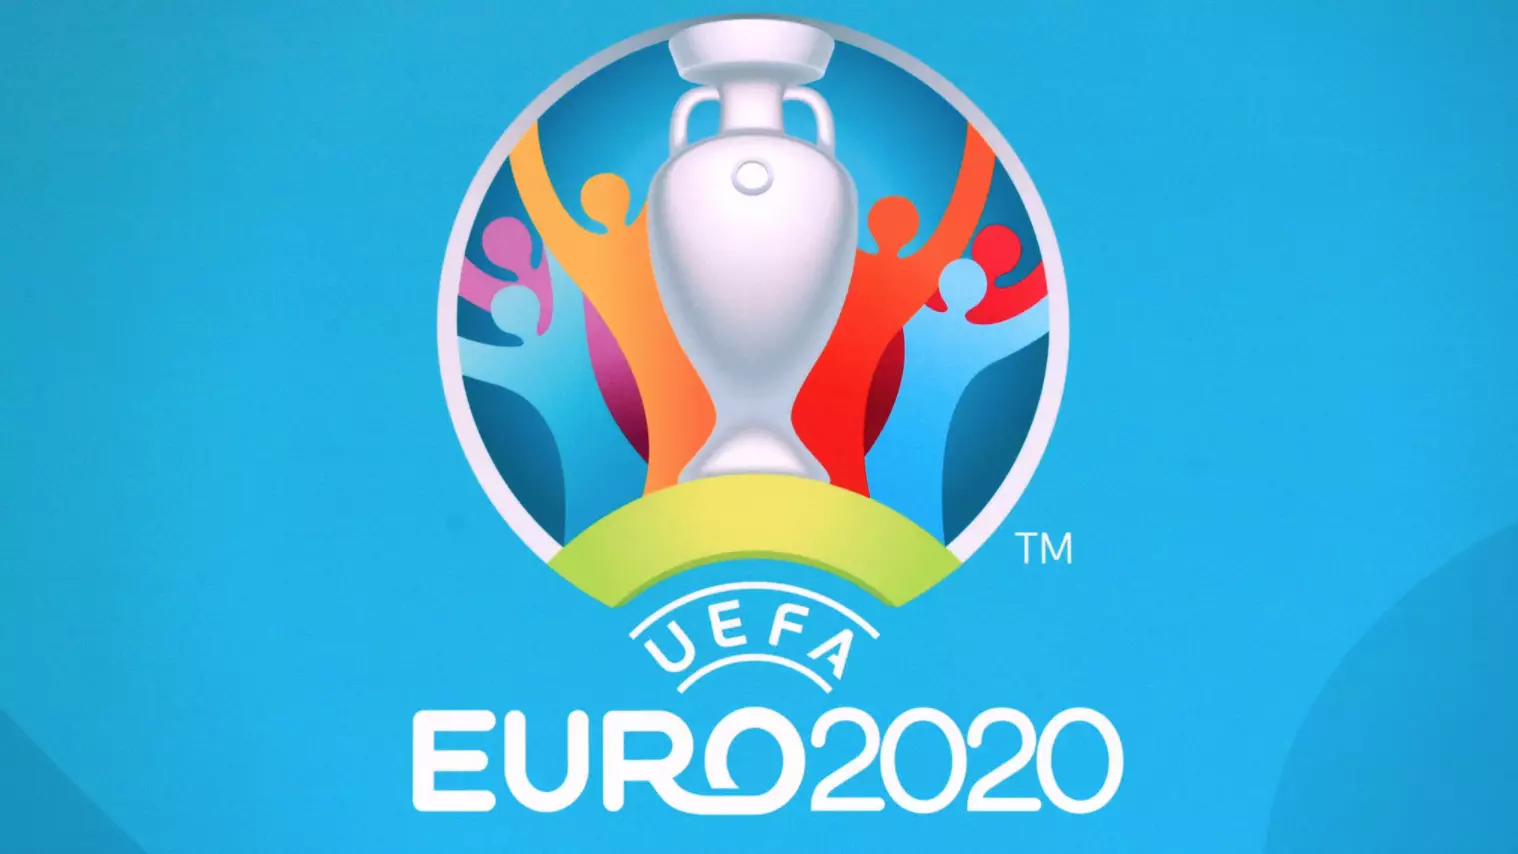 Reports Say Russia Is In The Frame To Host Delayed Euro 2020 Outright